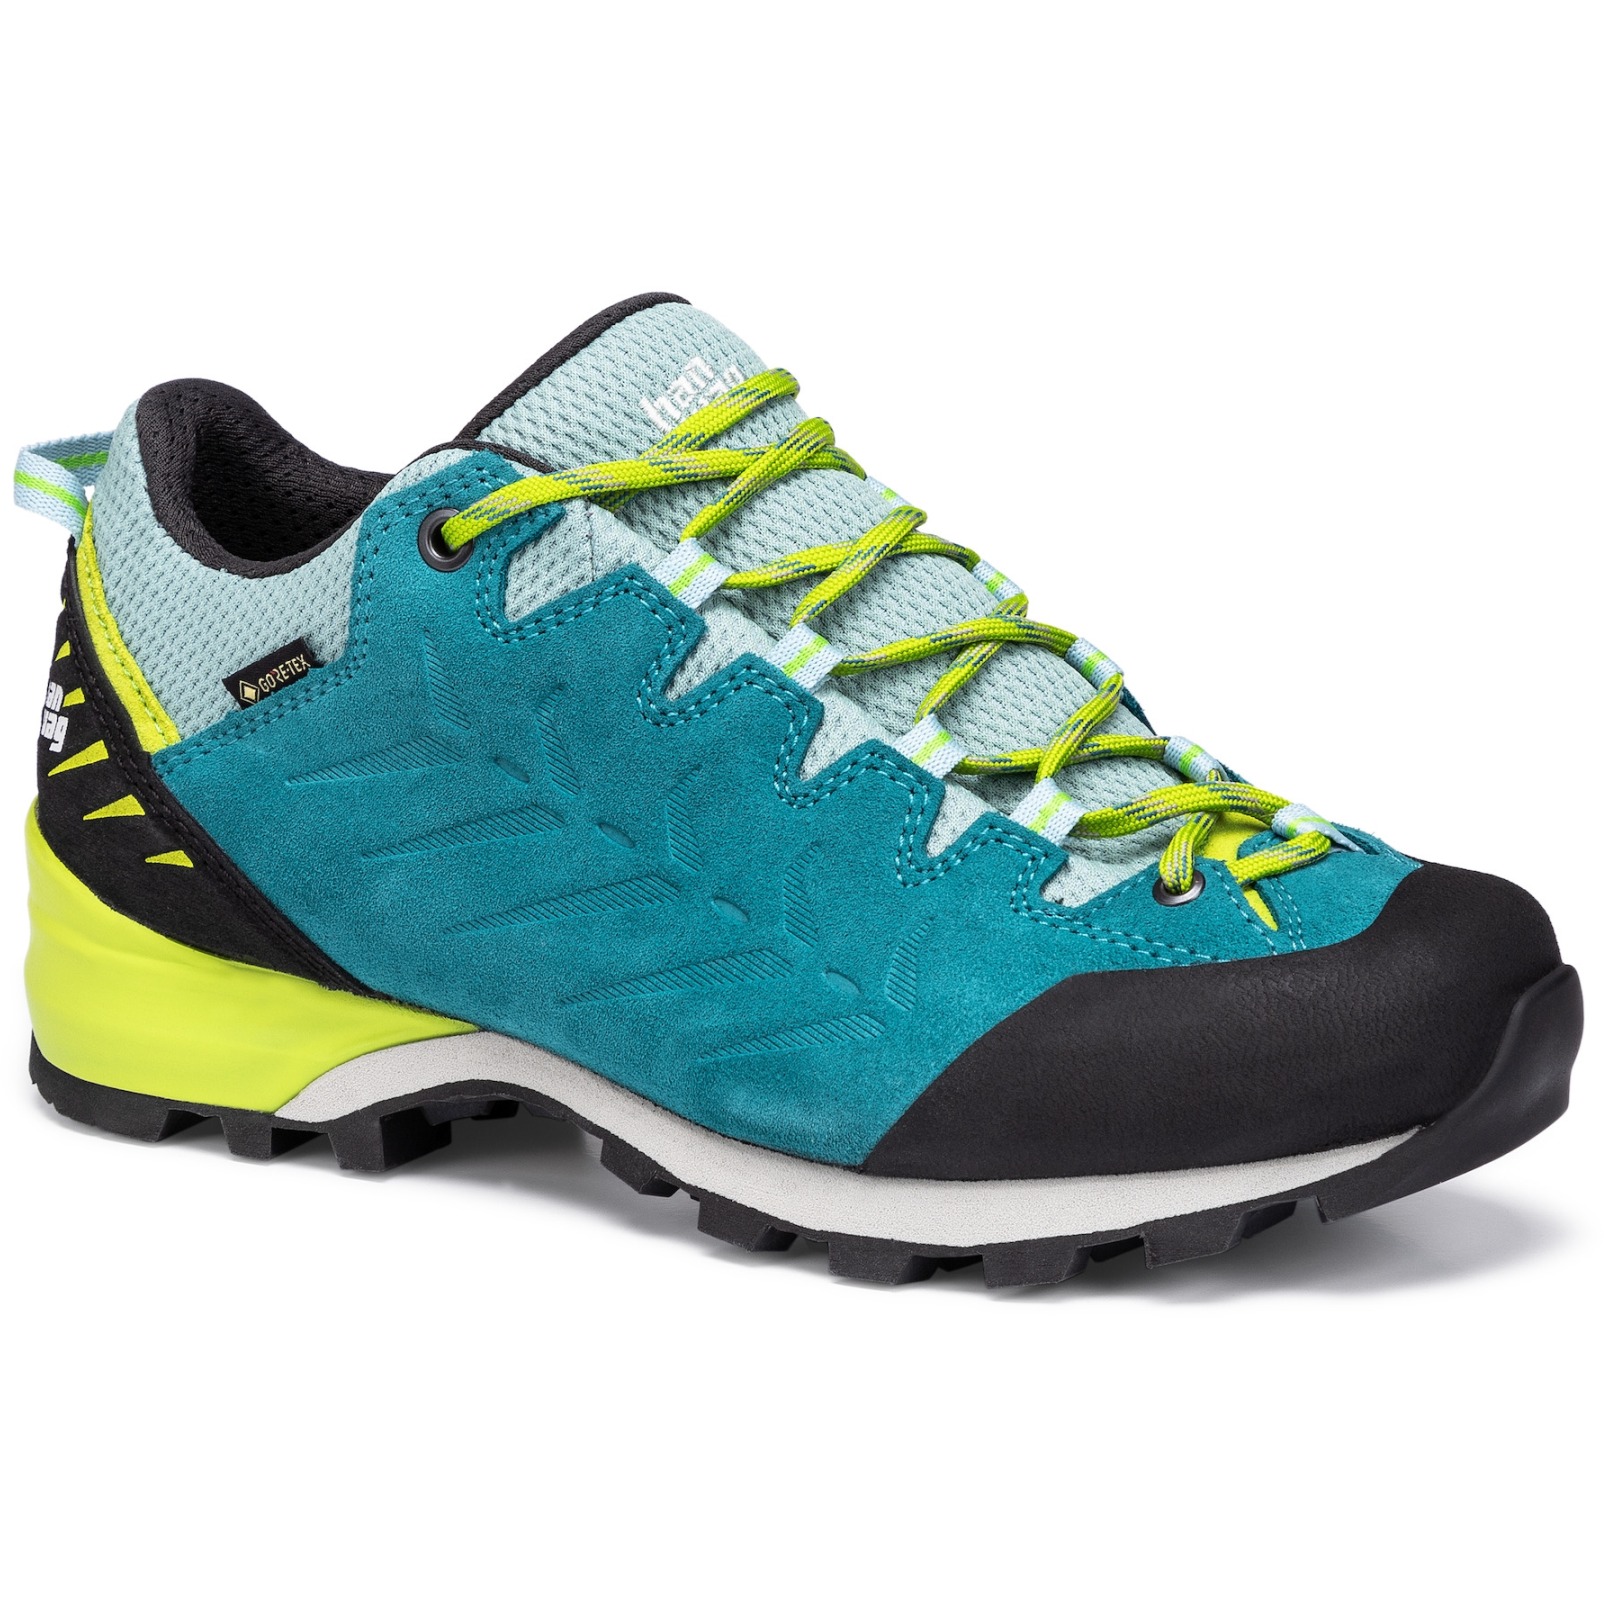 Picture of Hanwag Makra Pro Low GTX Approach Shoes Women - Icefall/Sulphur